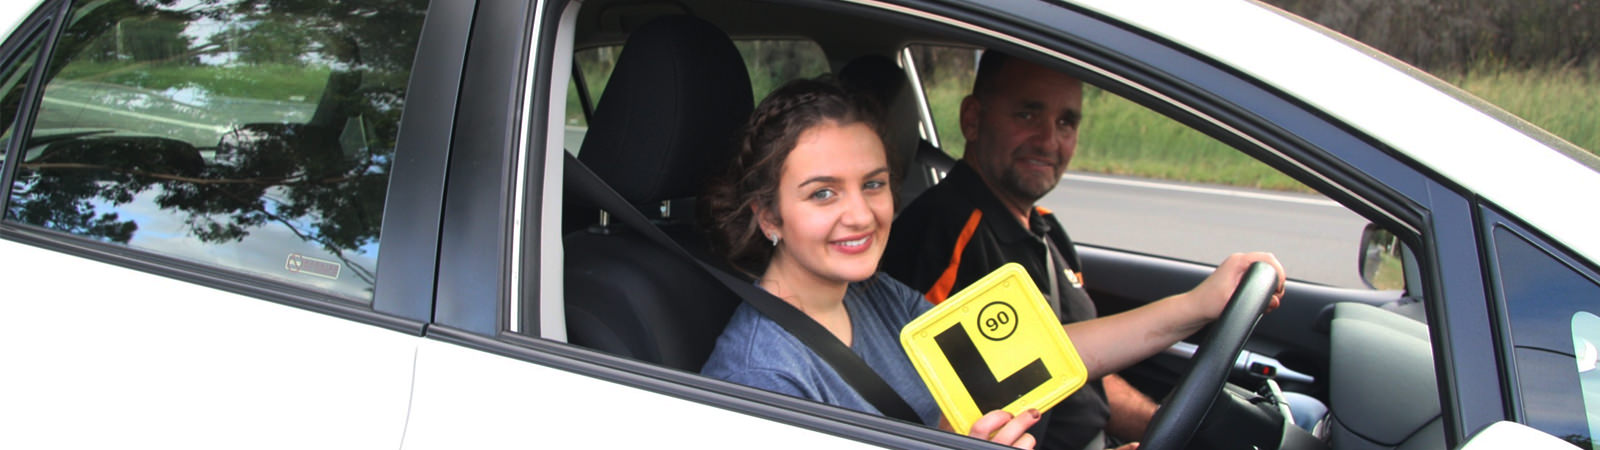 Driving Lessons For Beginners